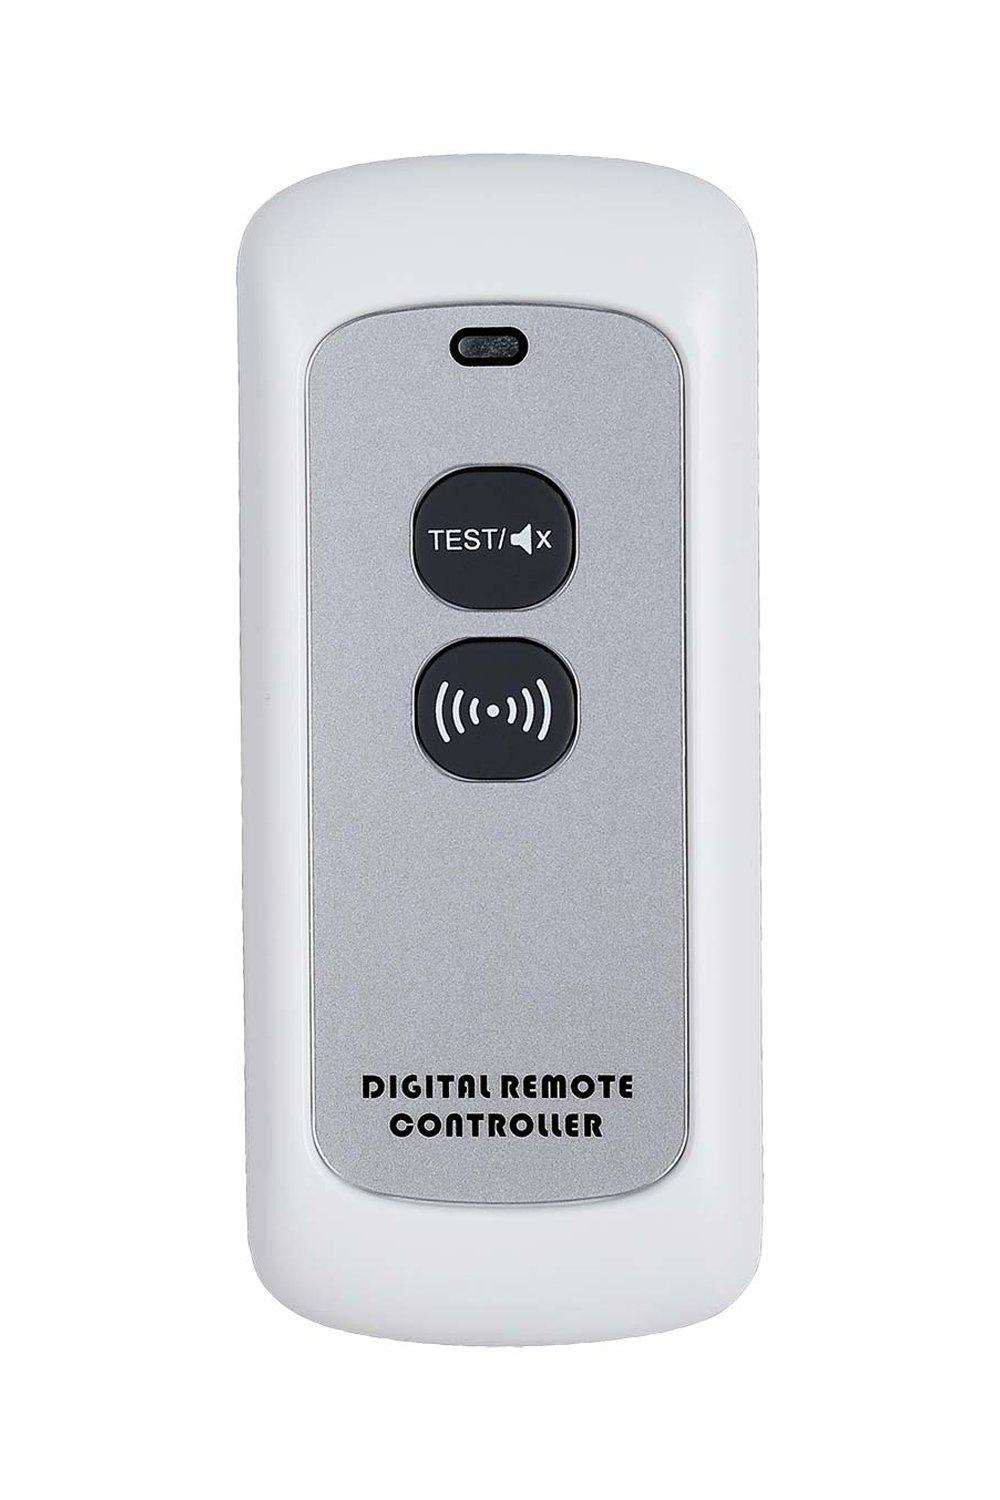 Wireless Remote Control for SAFE TECH SM Series Alarm Testing and Hush